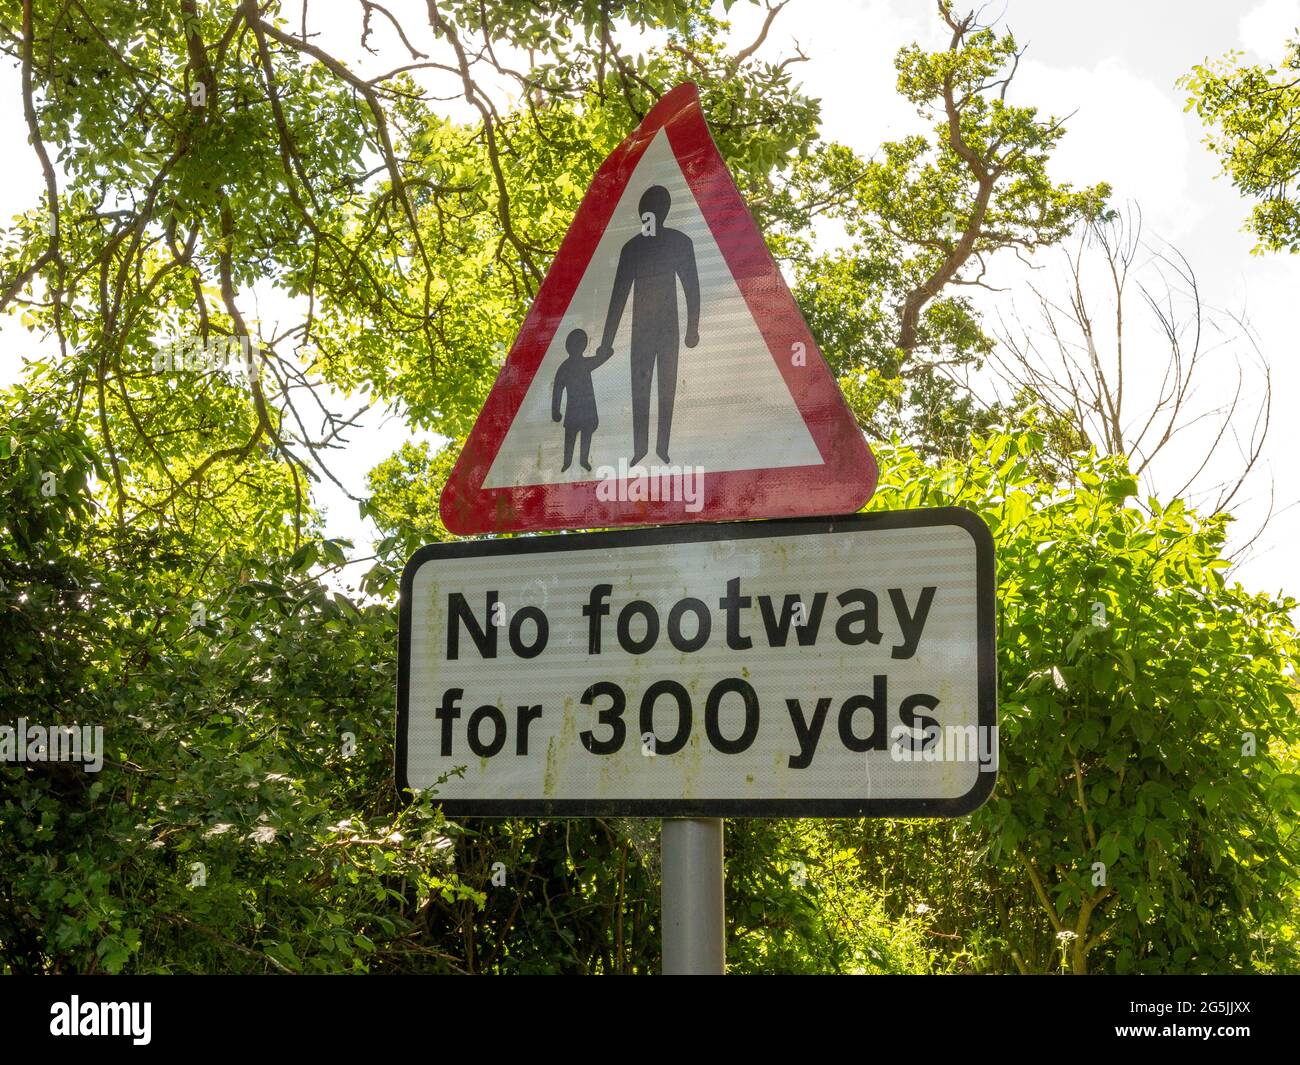 A roadside sign indicating that there is 'No footway for 300 yds' using words and an adult figure and child symbol in a warning red triangle Stock Photo